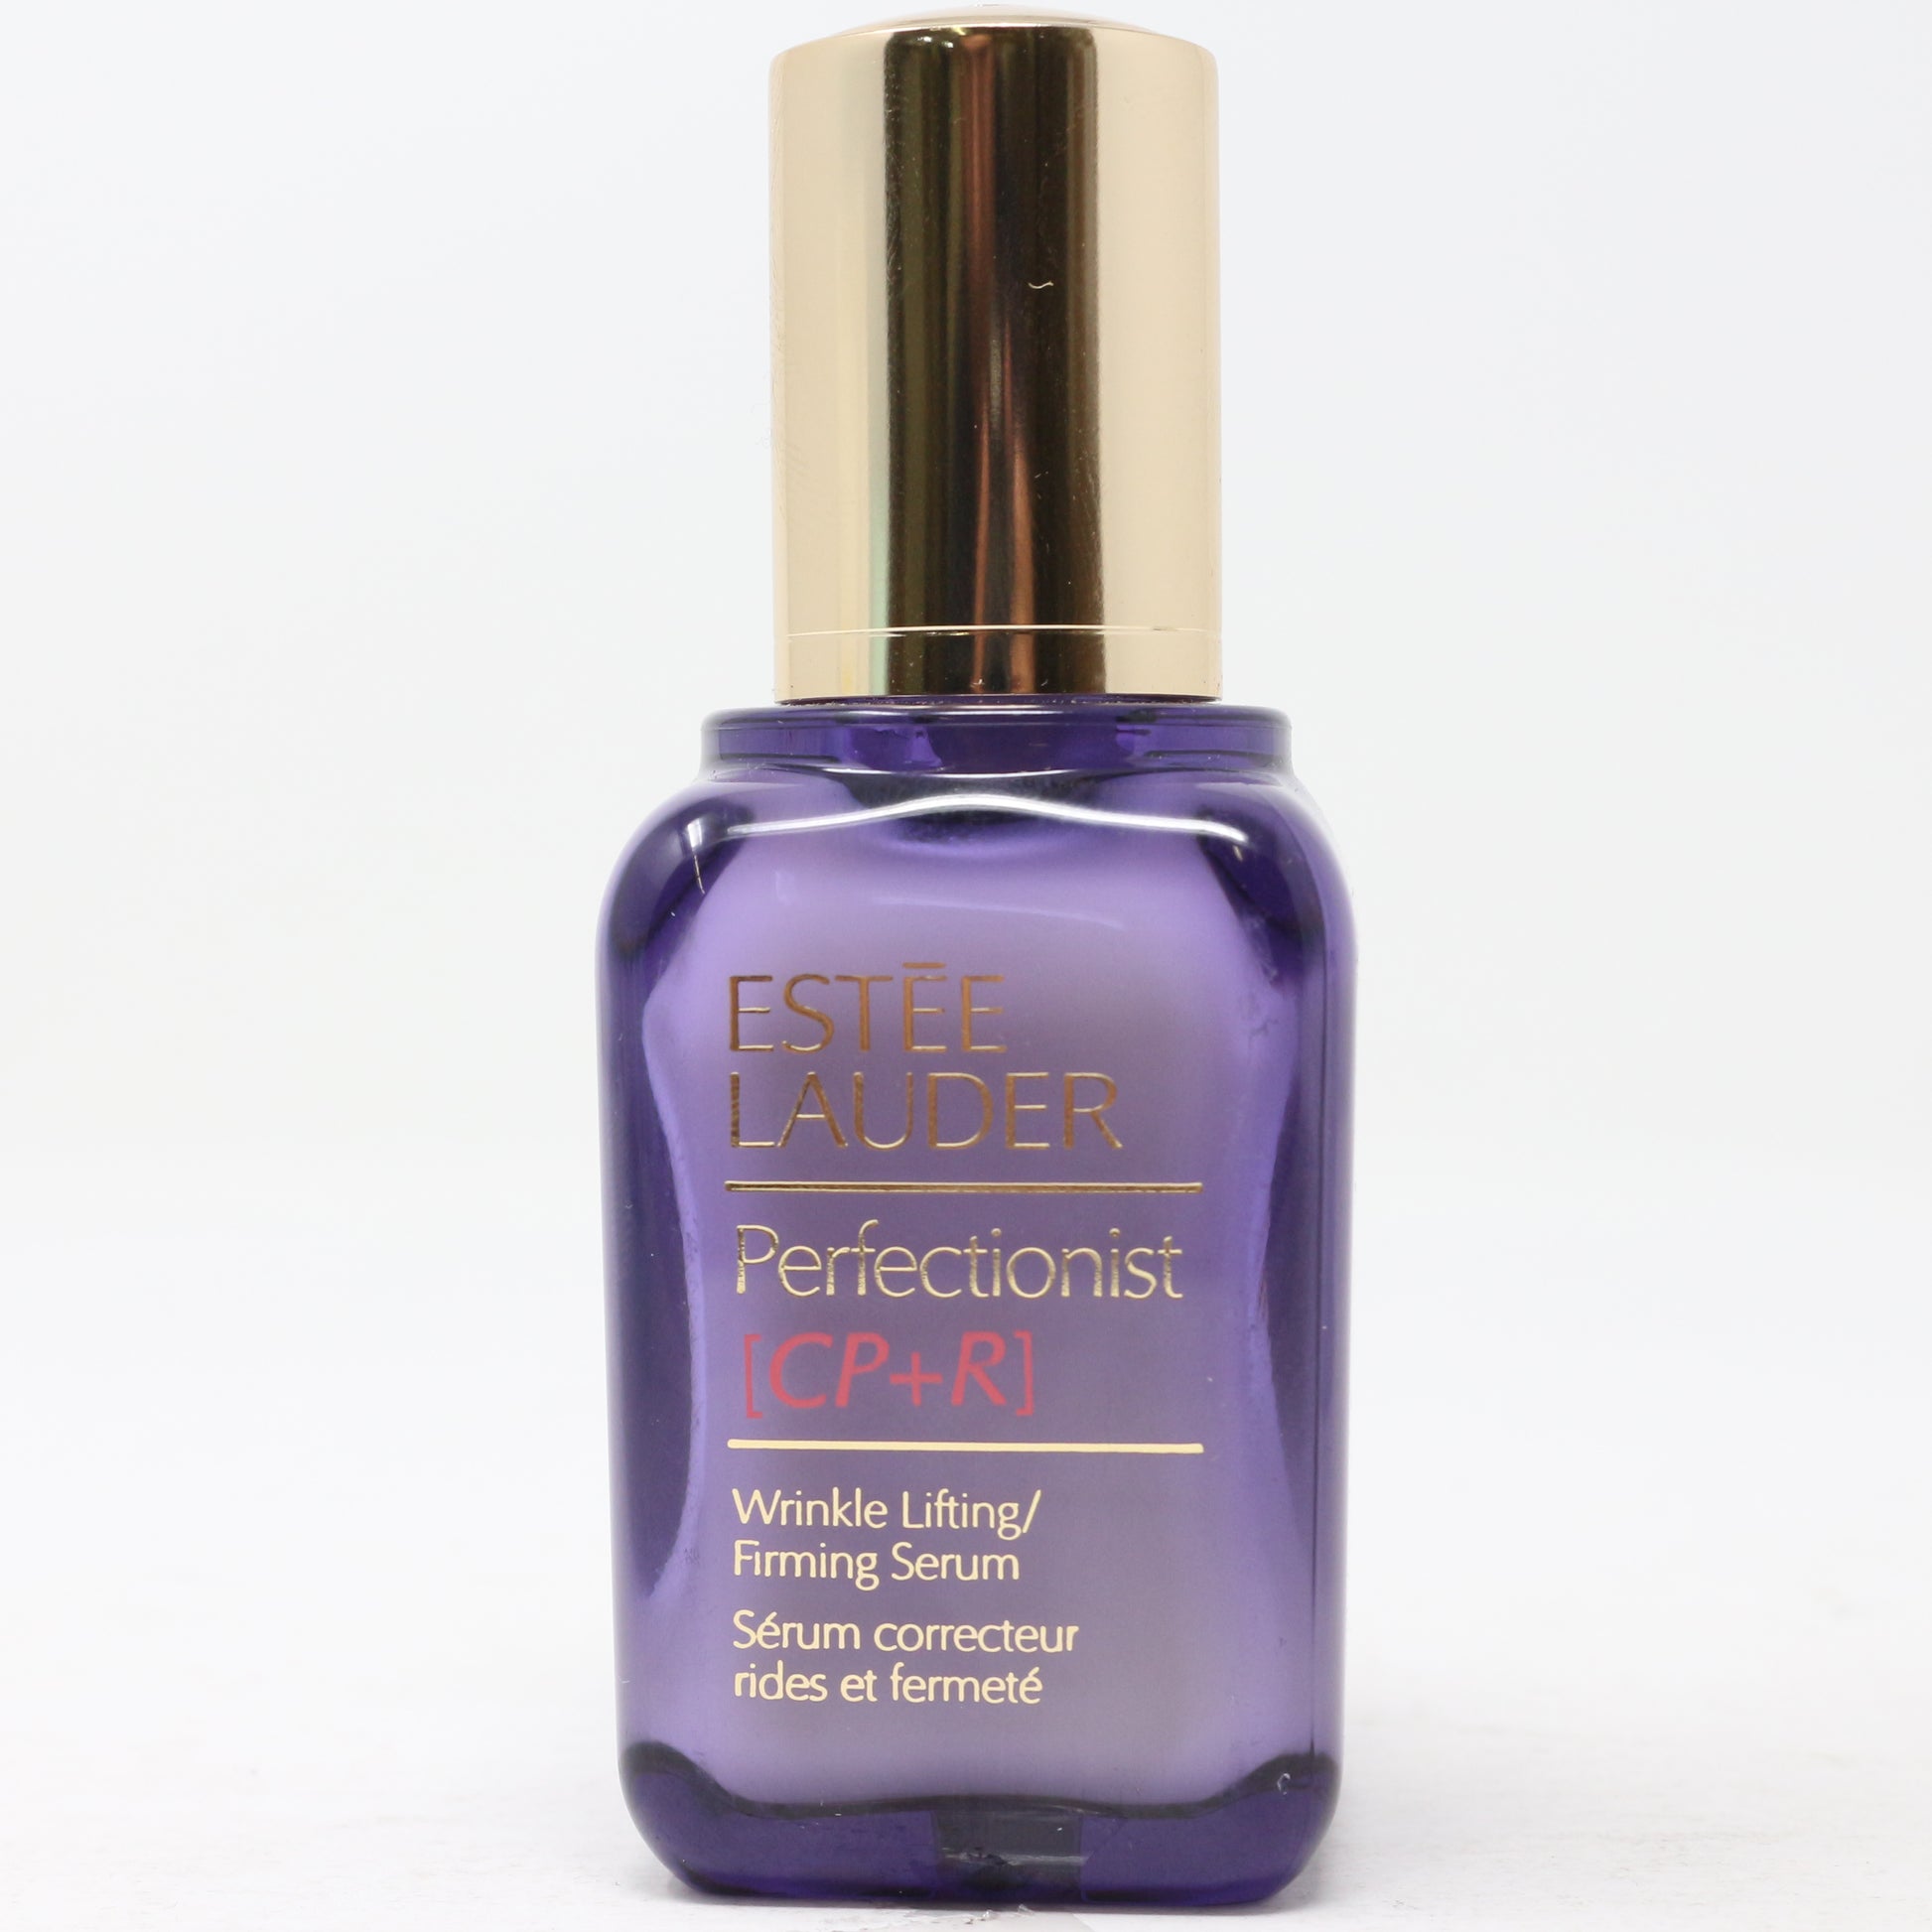 Perfectionist Wrinkle Lifting/Firming Serum 50 mL